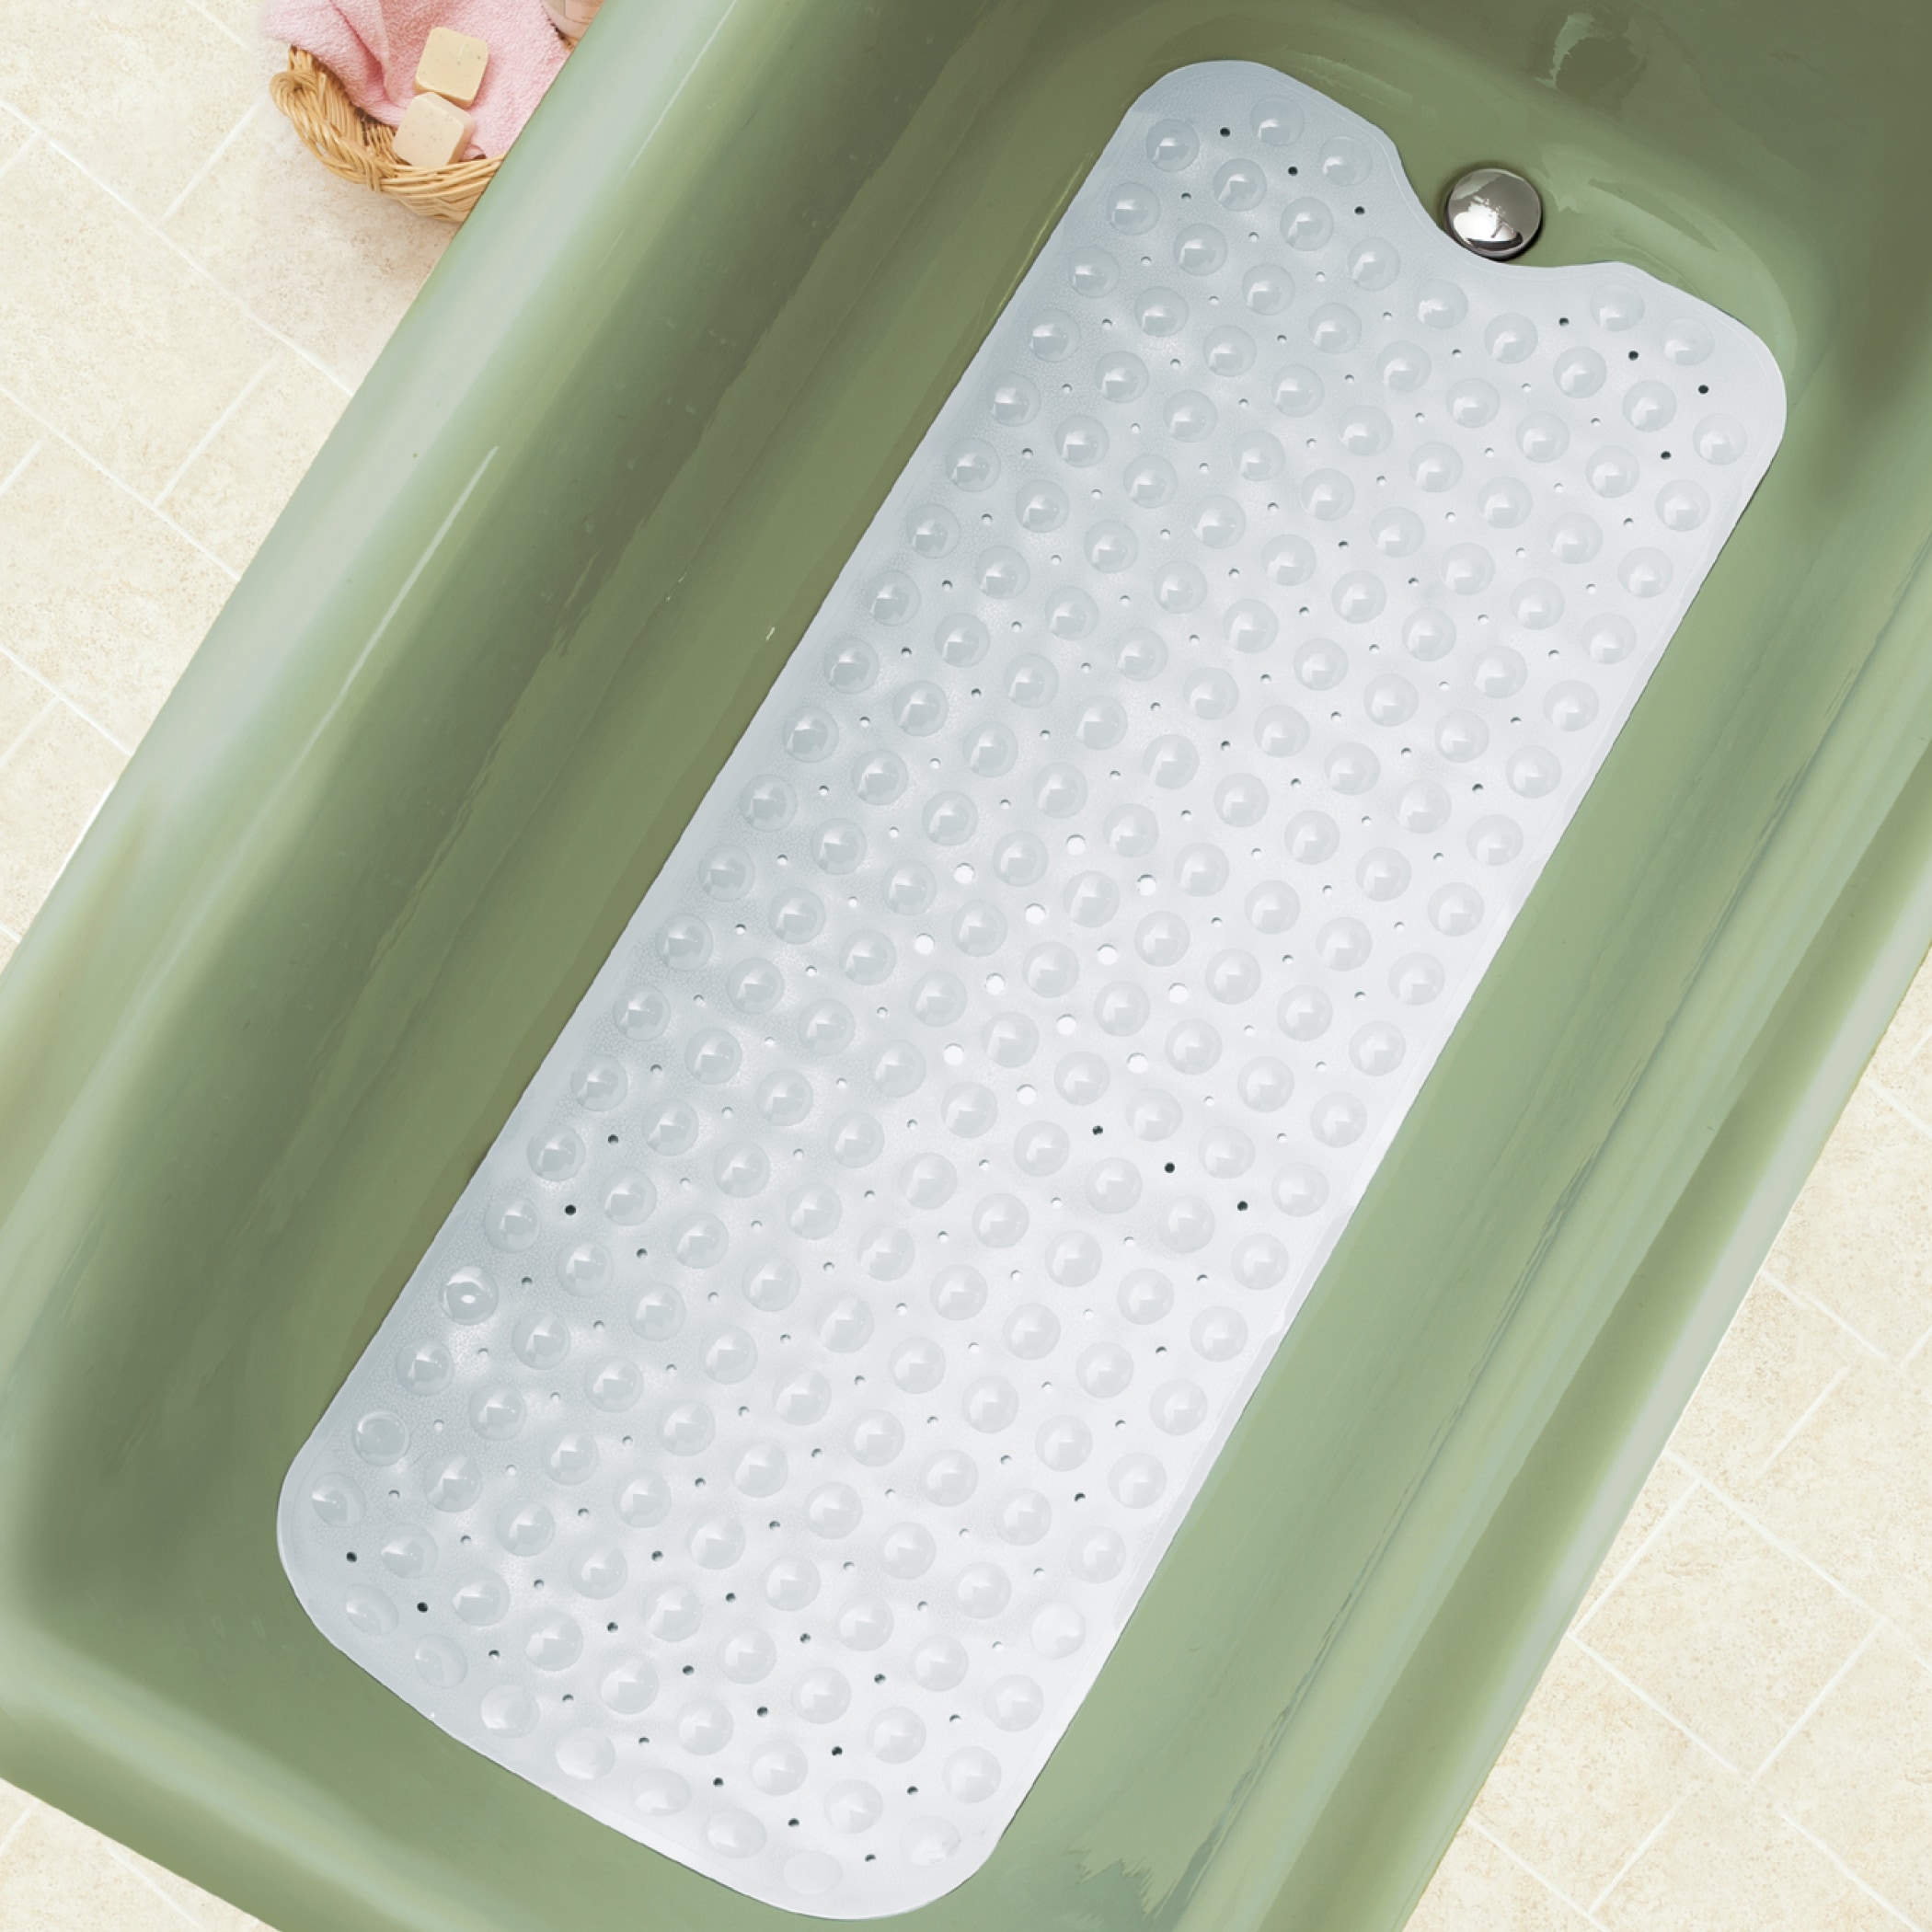 https://ak1.ostkcdn.com/images/products/is/images/direct/7959bf61067b593252ca21408d041e93144bb72d/Extra-Long-Cushioned-Bathtub-Mat.jpg